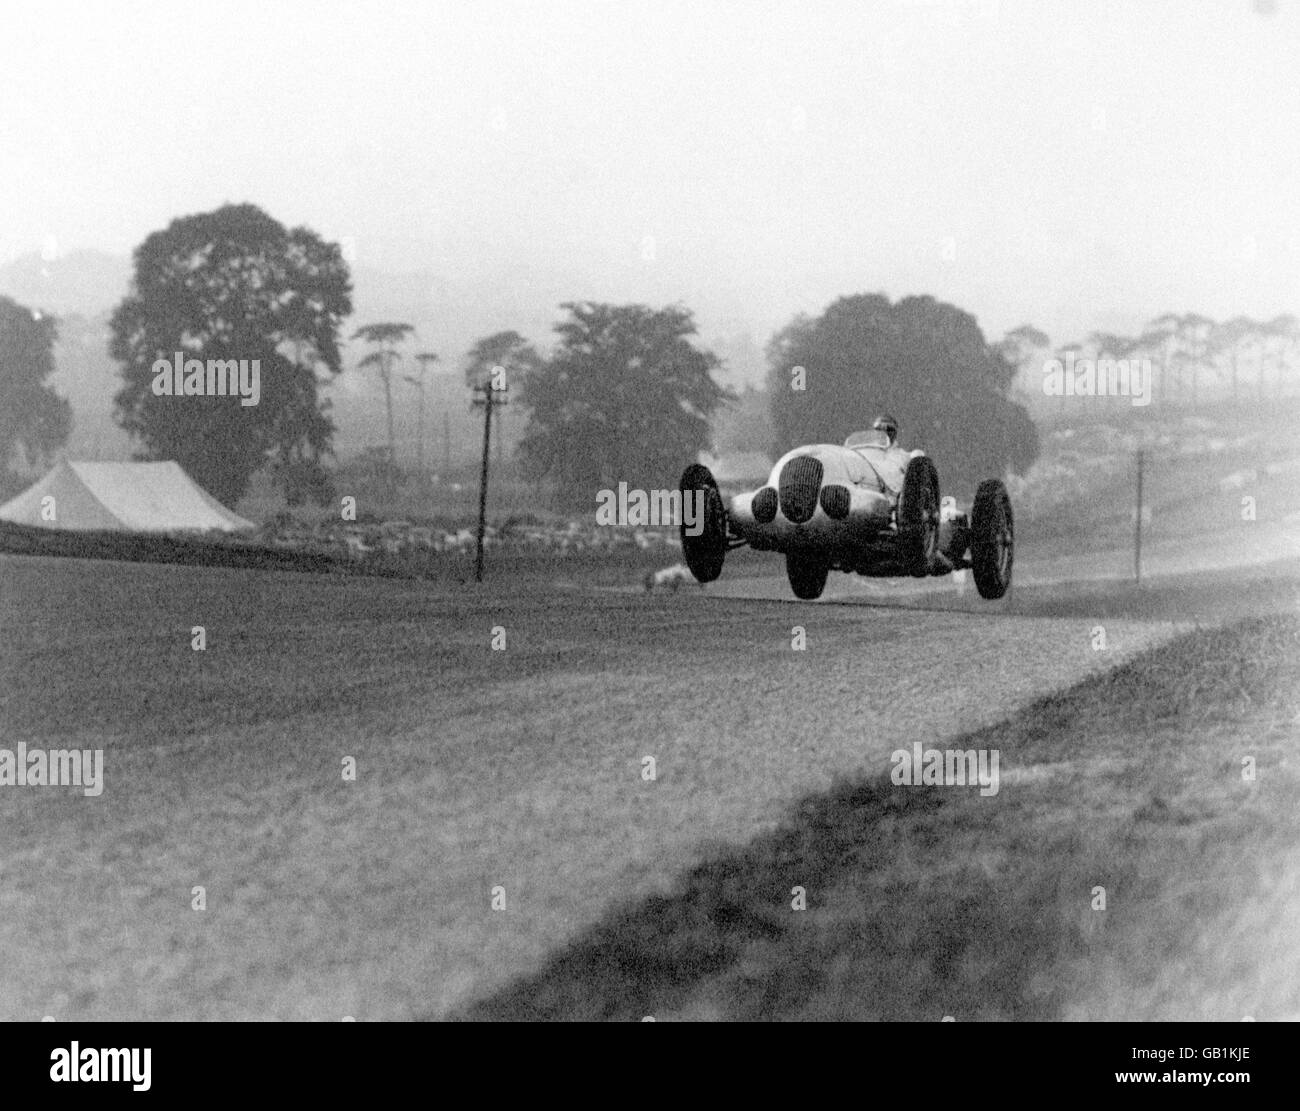 Manfred von Brauchitsch takes off as he crests a hill Stock Photo